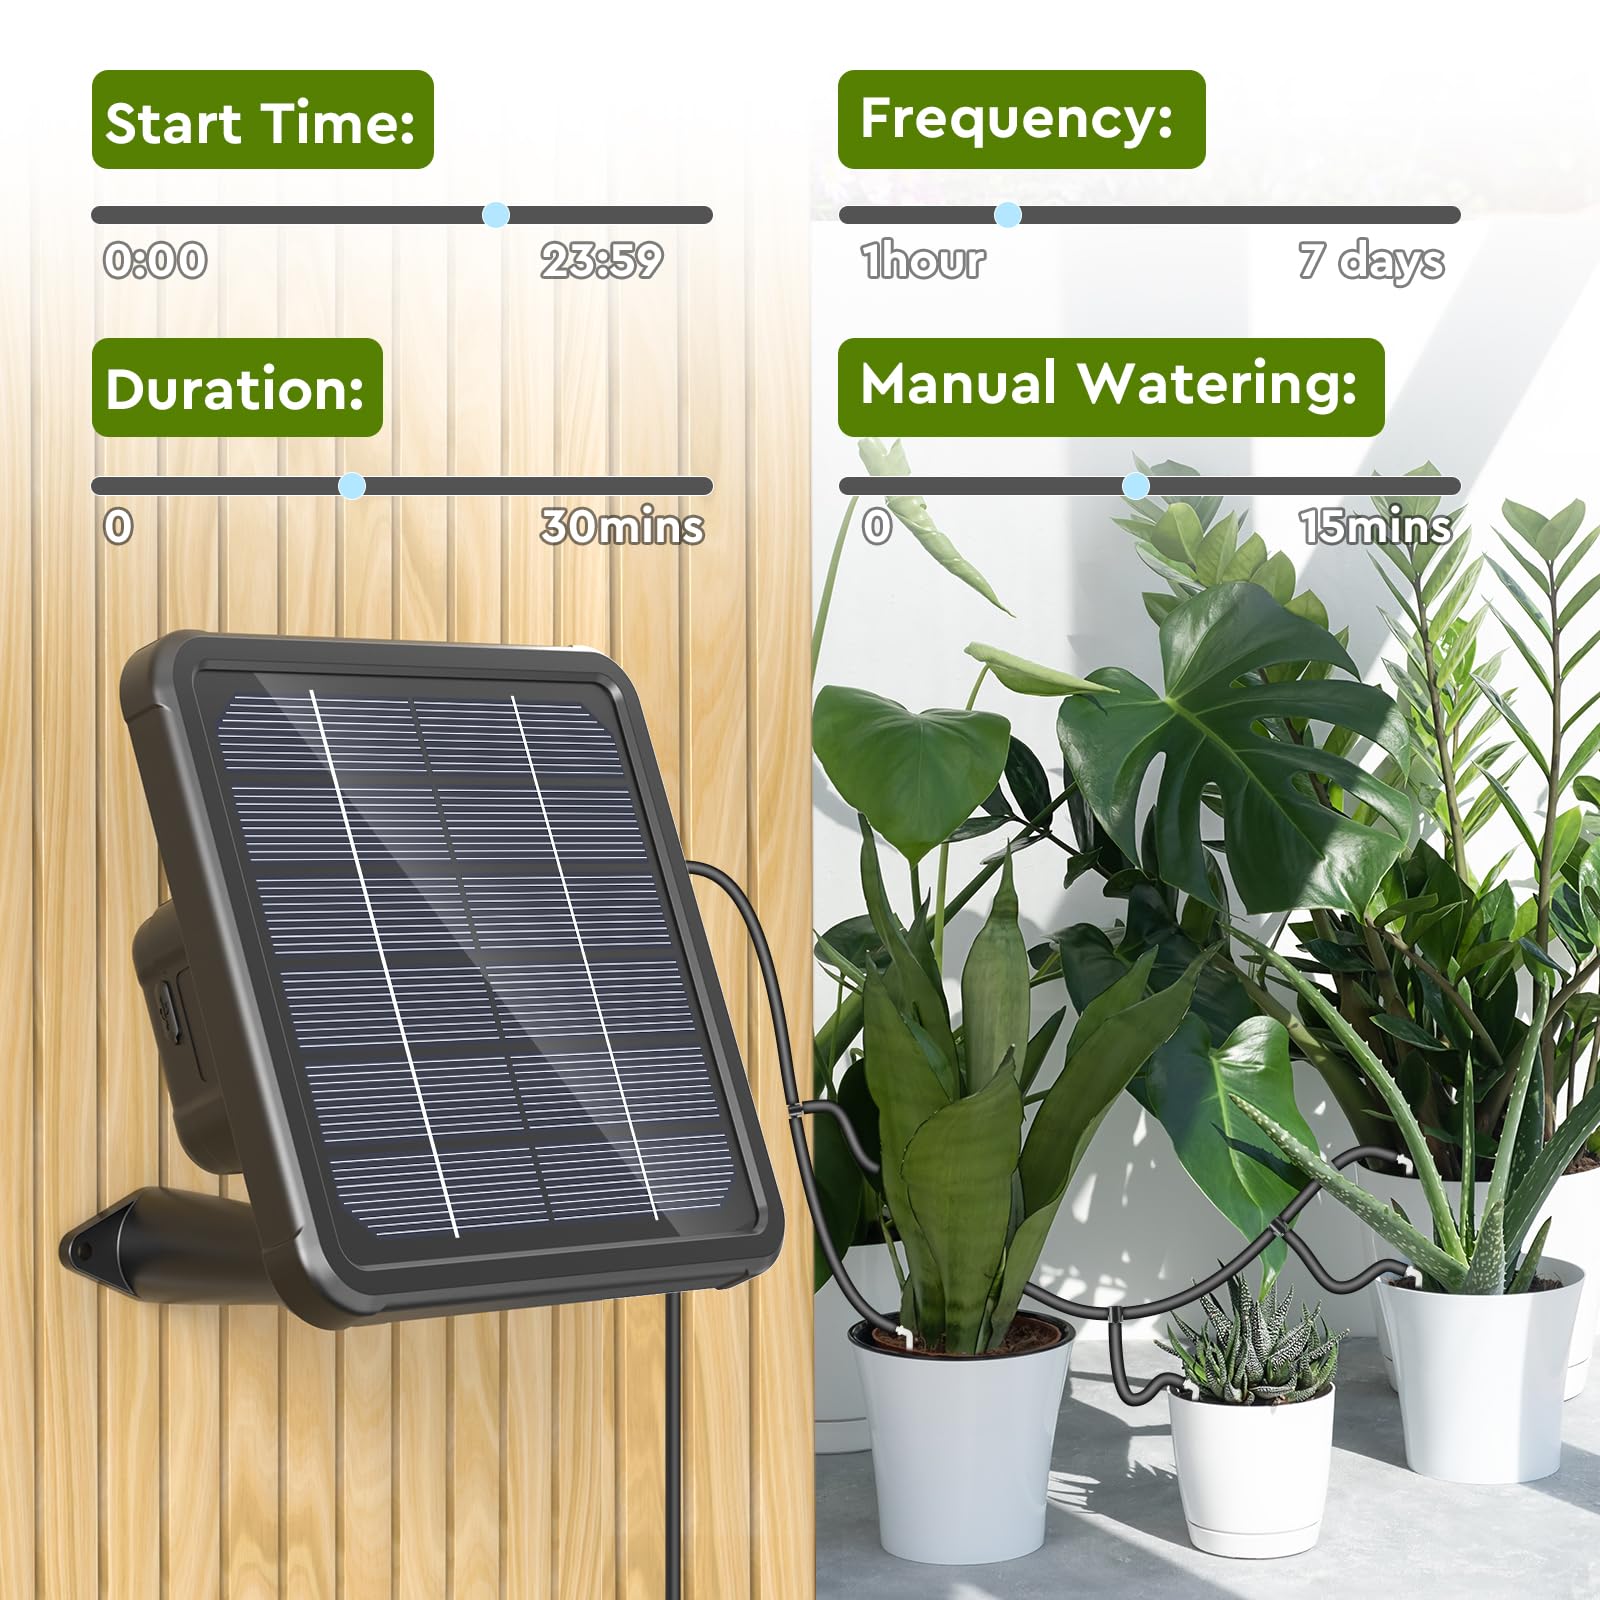 Solar Automatic Drip Irrigation Kits, Support 15 Potted Plants, Automatic Watering System for Indoor and Outdoor Garden, Eco-Friendly and Cost-Effective - Plantonio